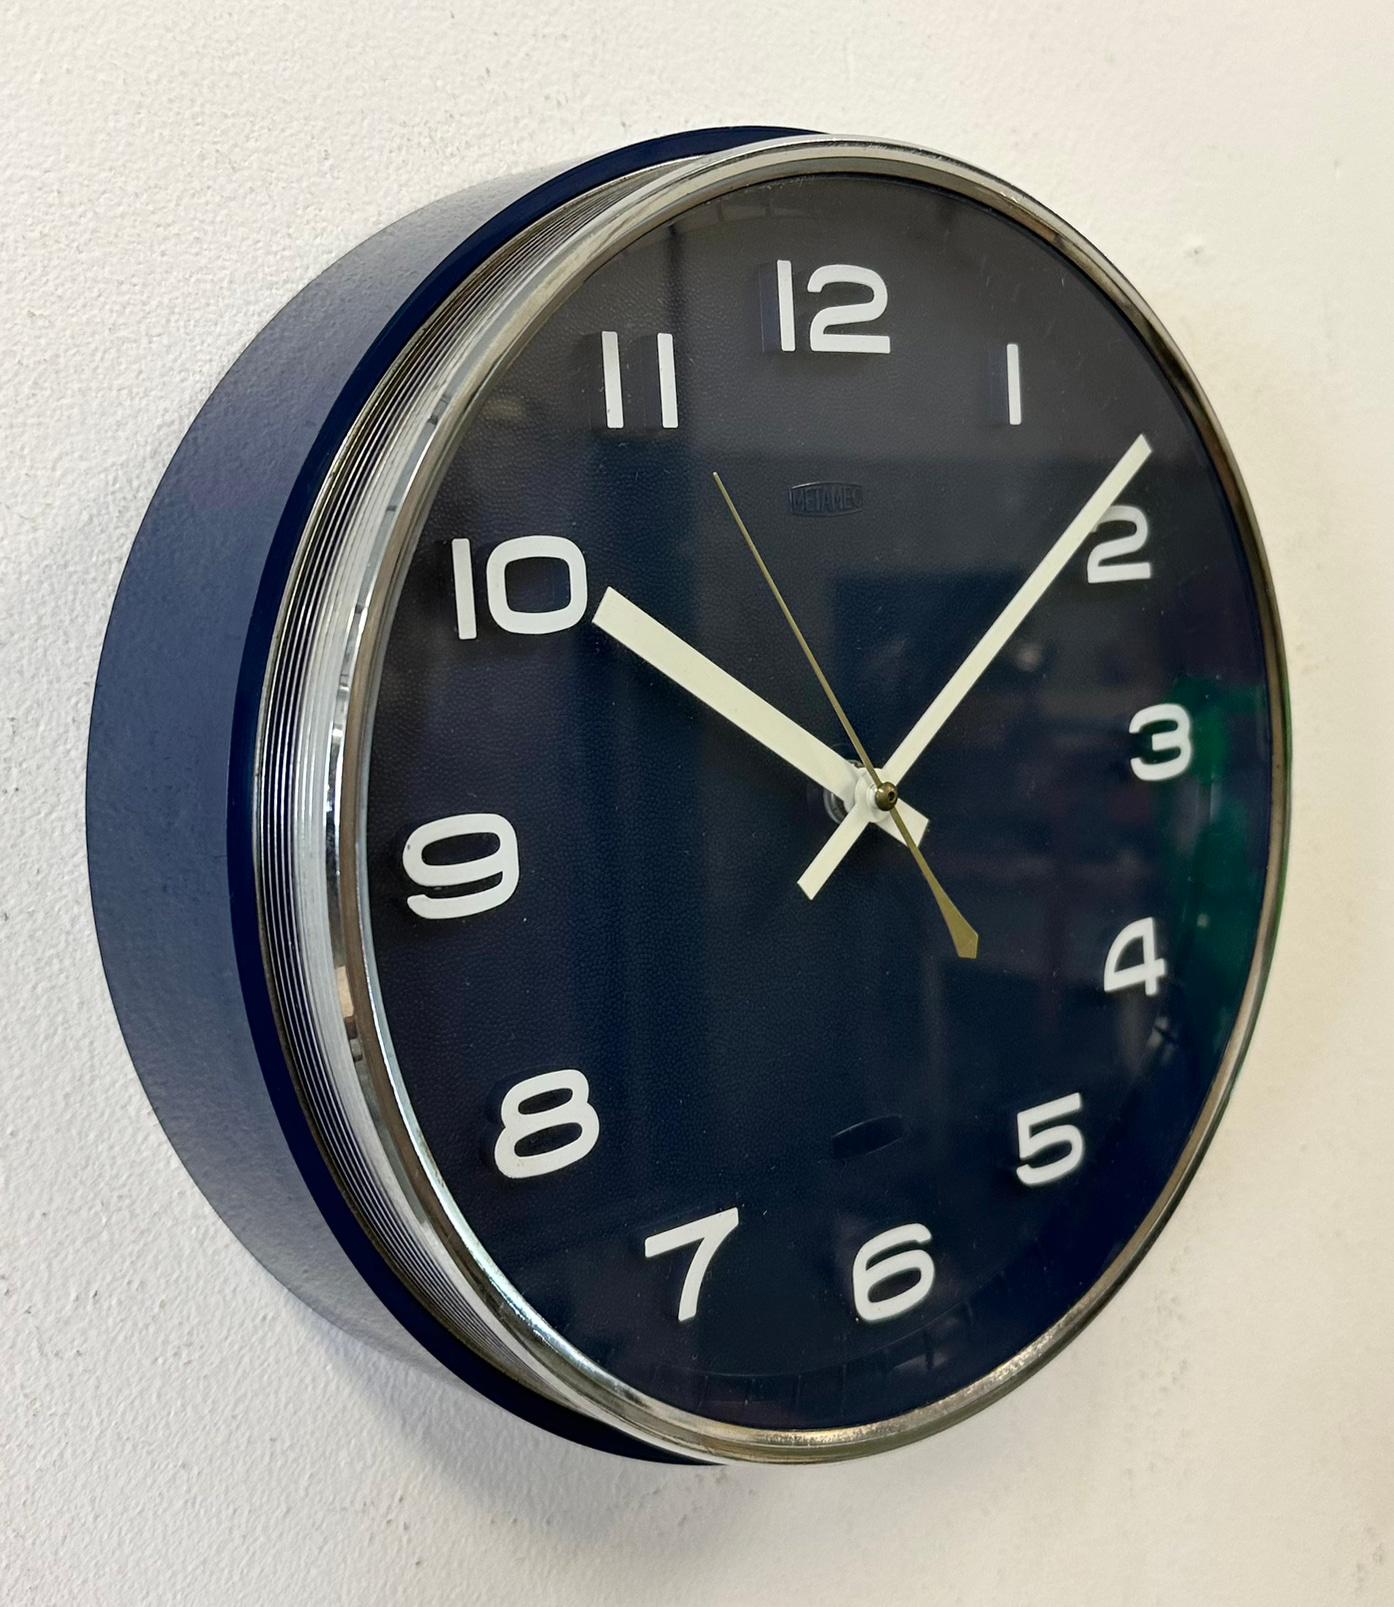 Metamec wall clock was made in United Kingdom during the 1970s. It features a blue bakelite body with chrome ring, an aluminium hands and a clear glass cover. Original electric movement ( 220 V ) works perfectly . The diameter of the clock is 25